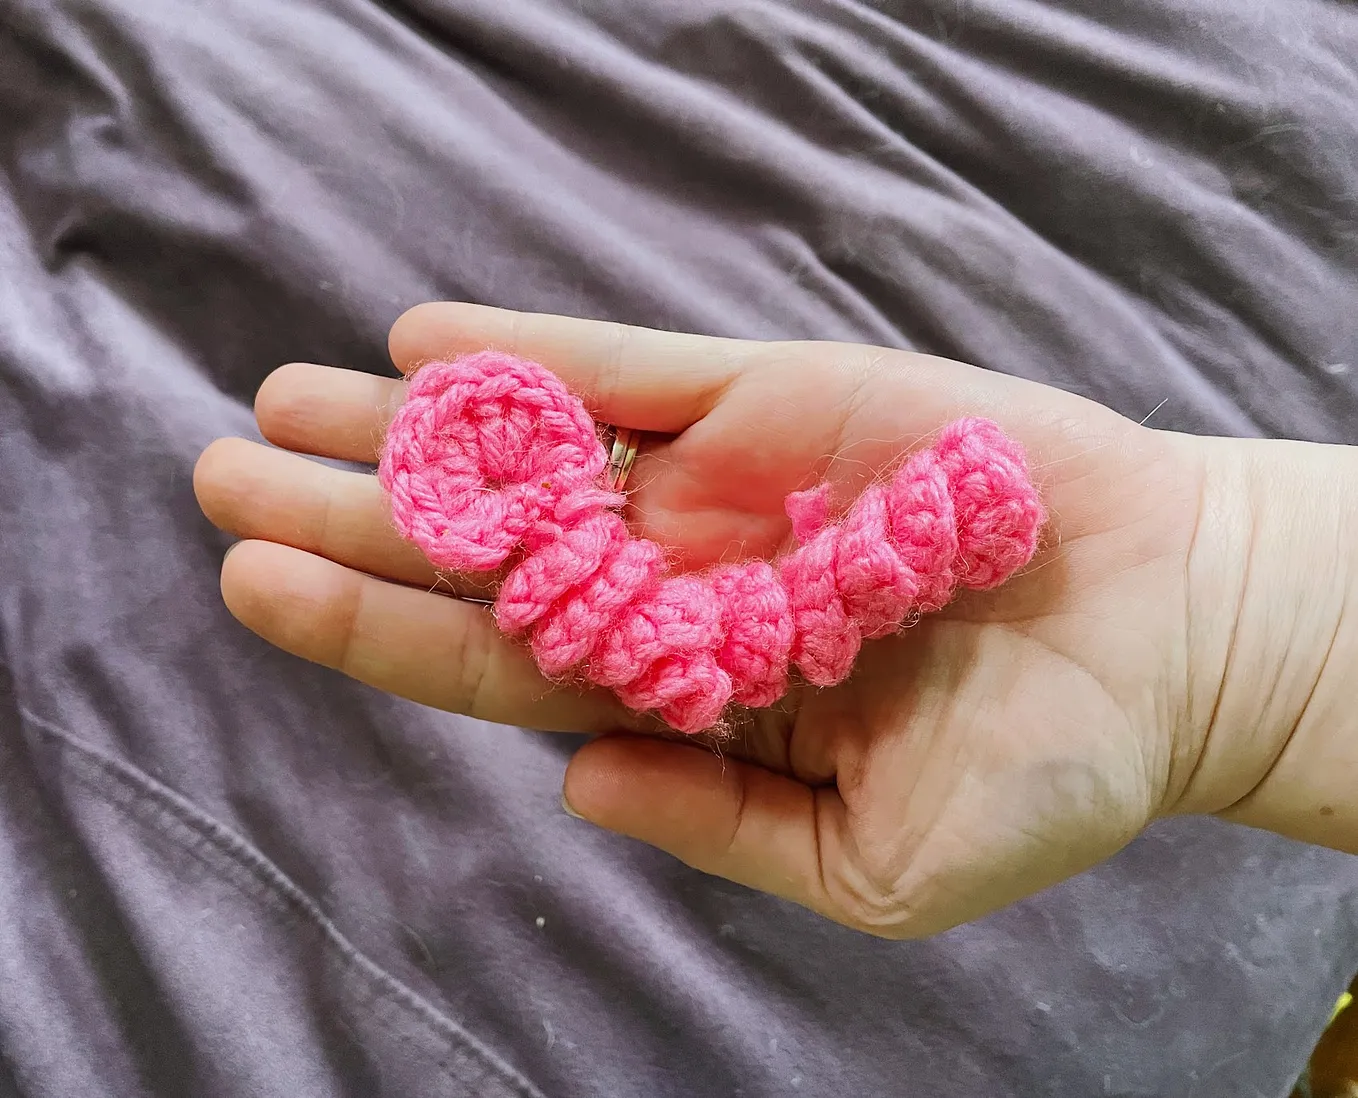 A pink crochet “worry worm” held in an open palm